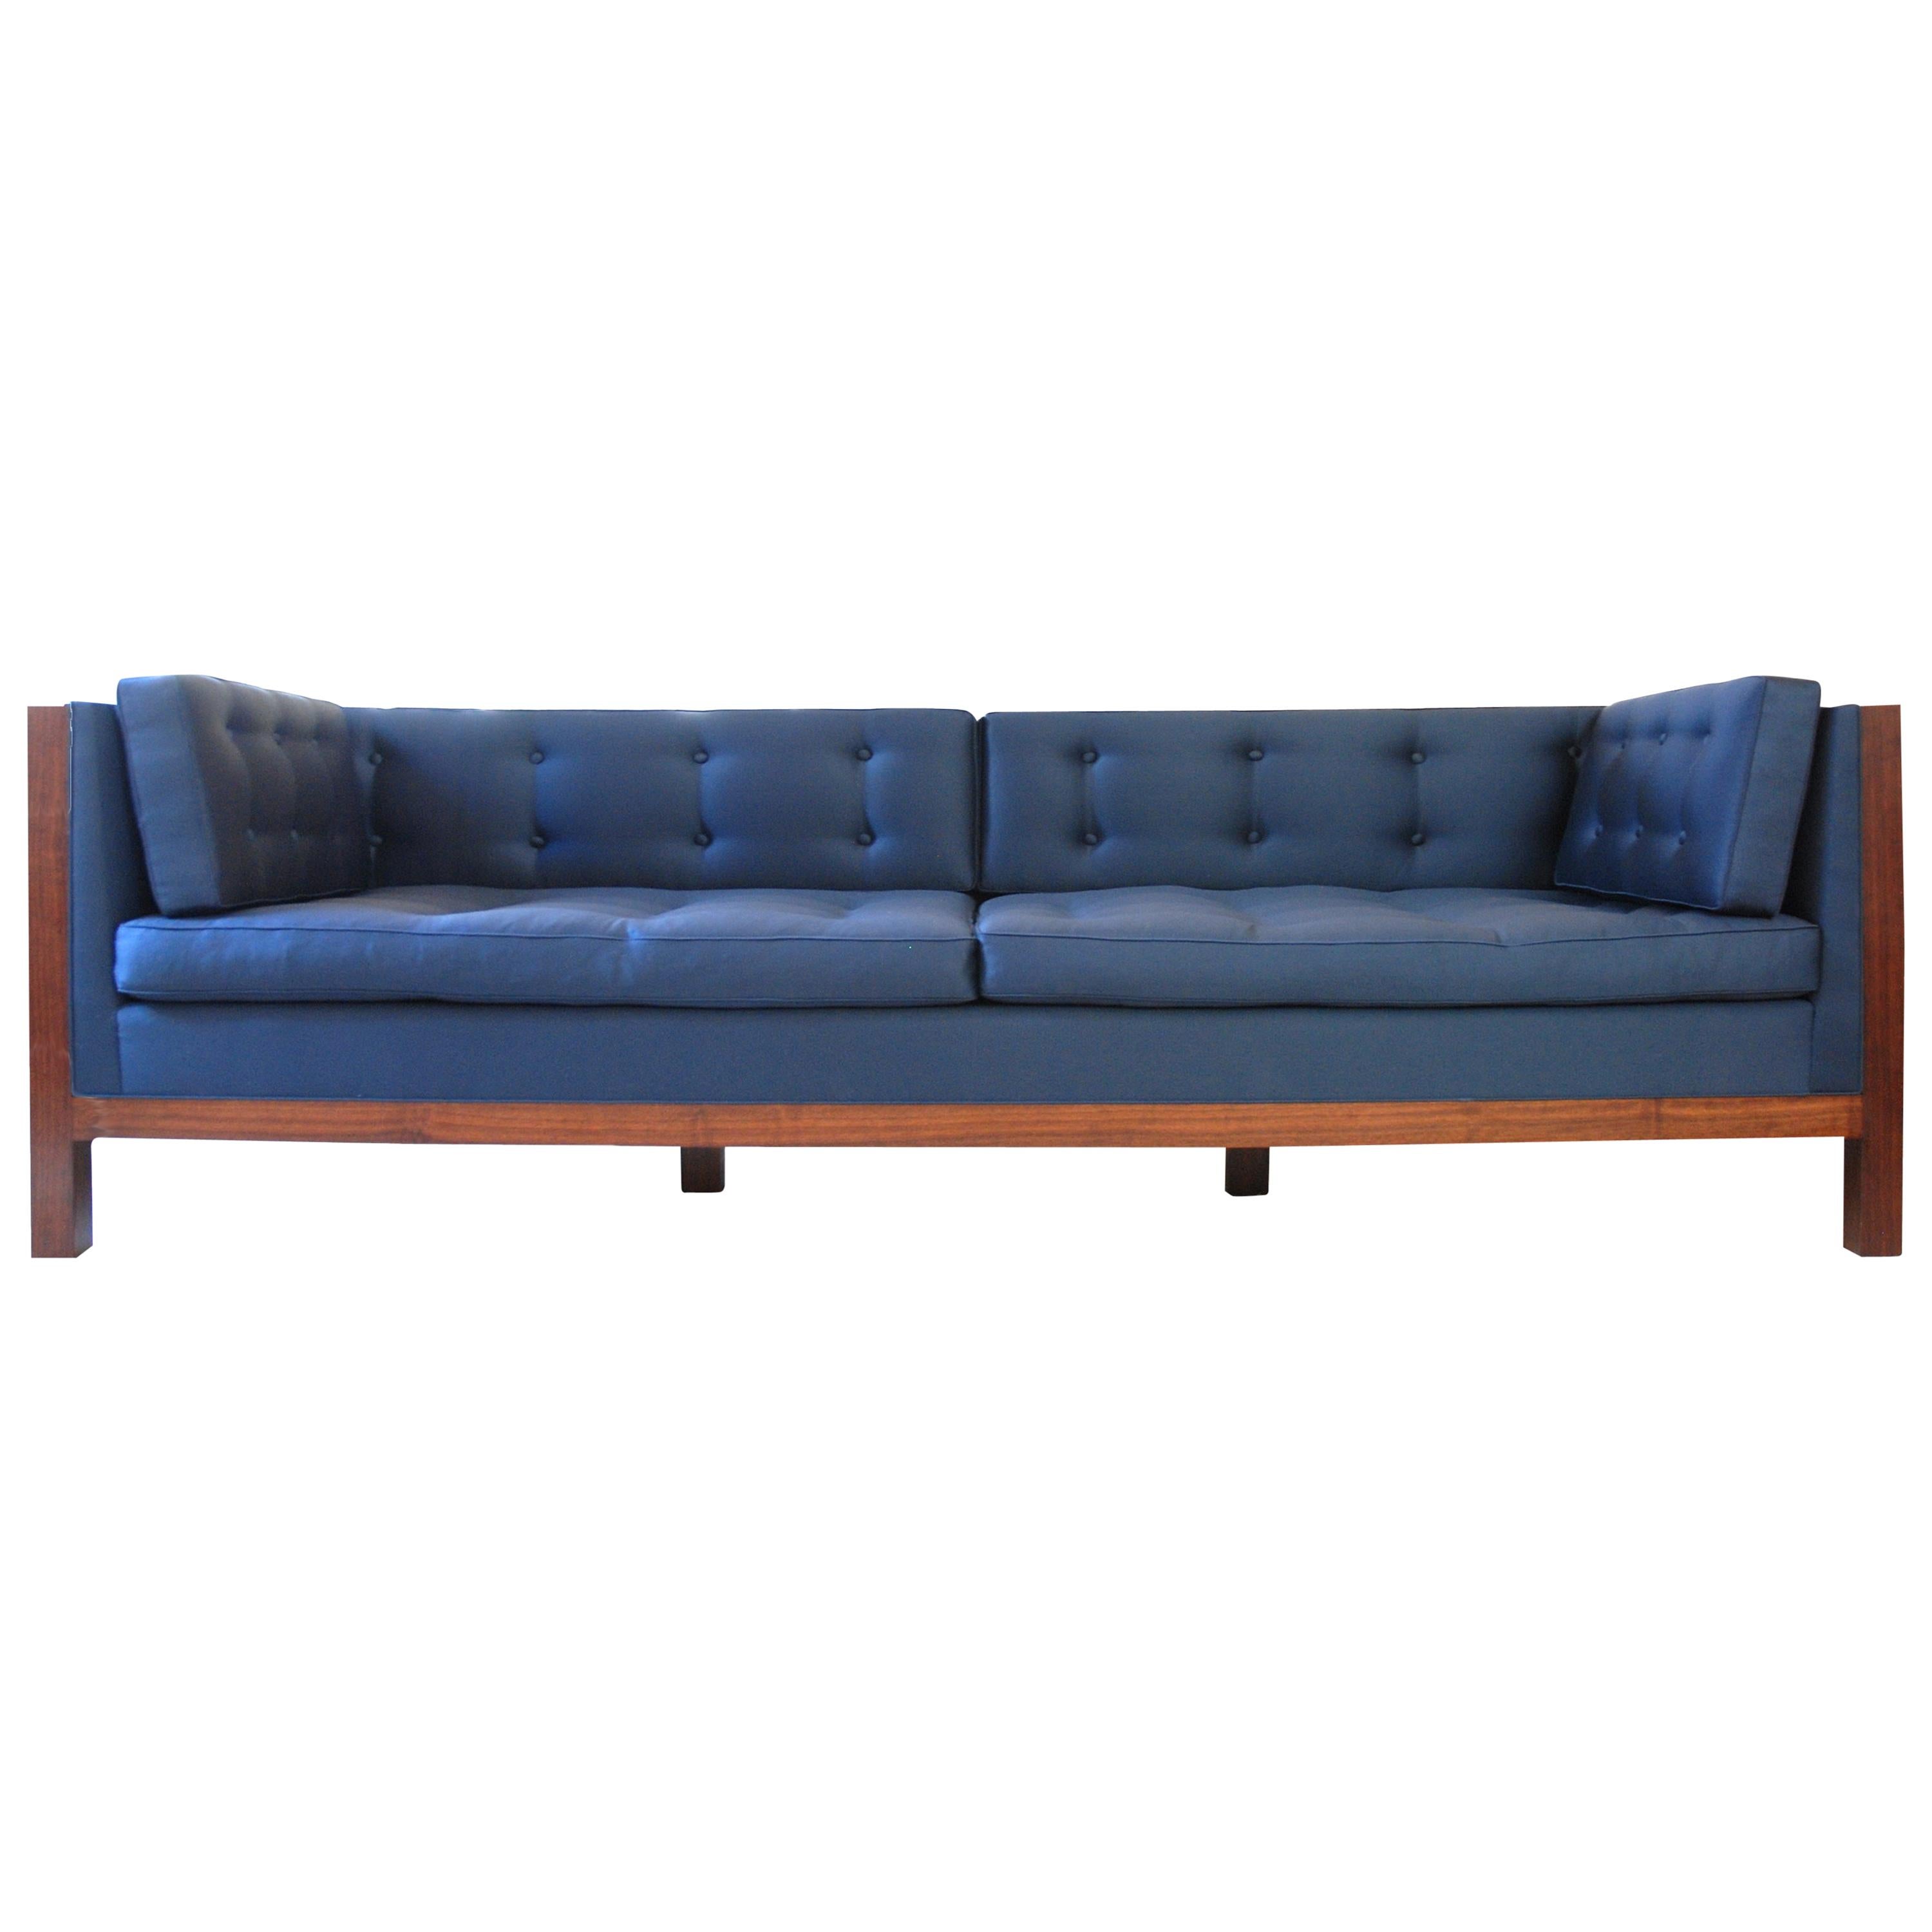 The walnut sofa has a tight upholstered frame with loose back, arm and seat cushions, which are button tufted and upholstered in a blue wool sateen textile. 

The sofa's inset panels are book-matched walnut veneer.

This item is a showroom